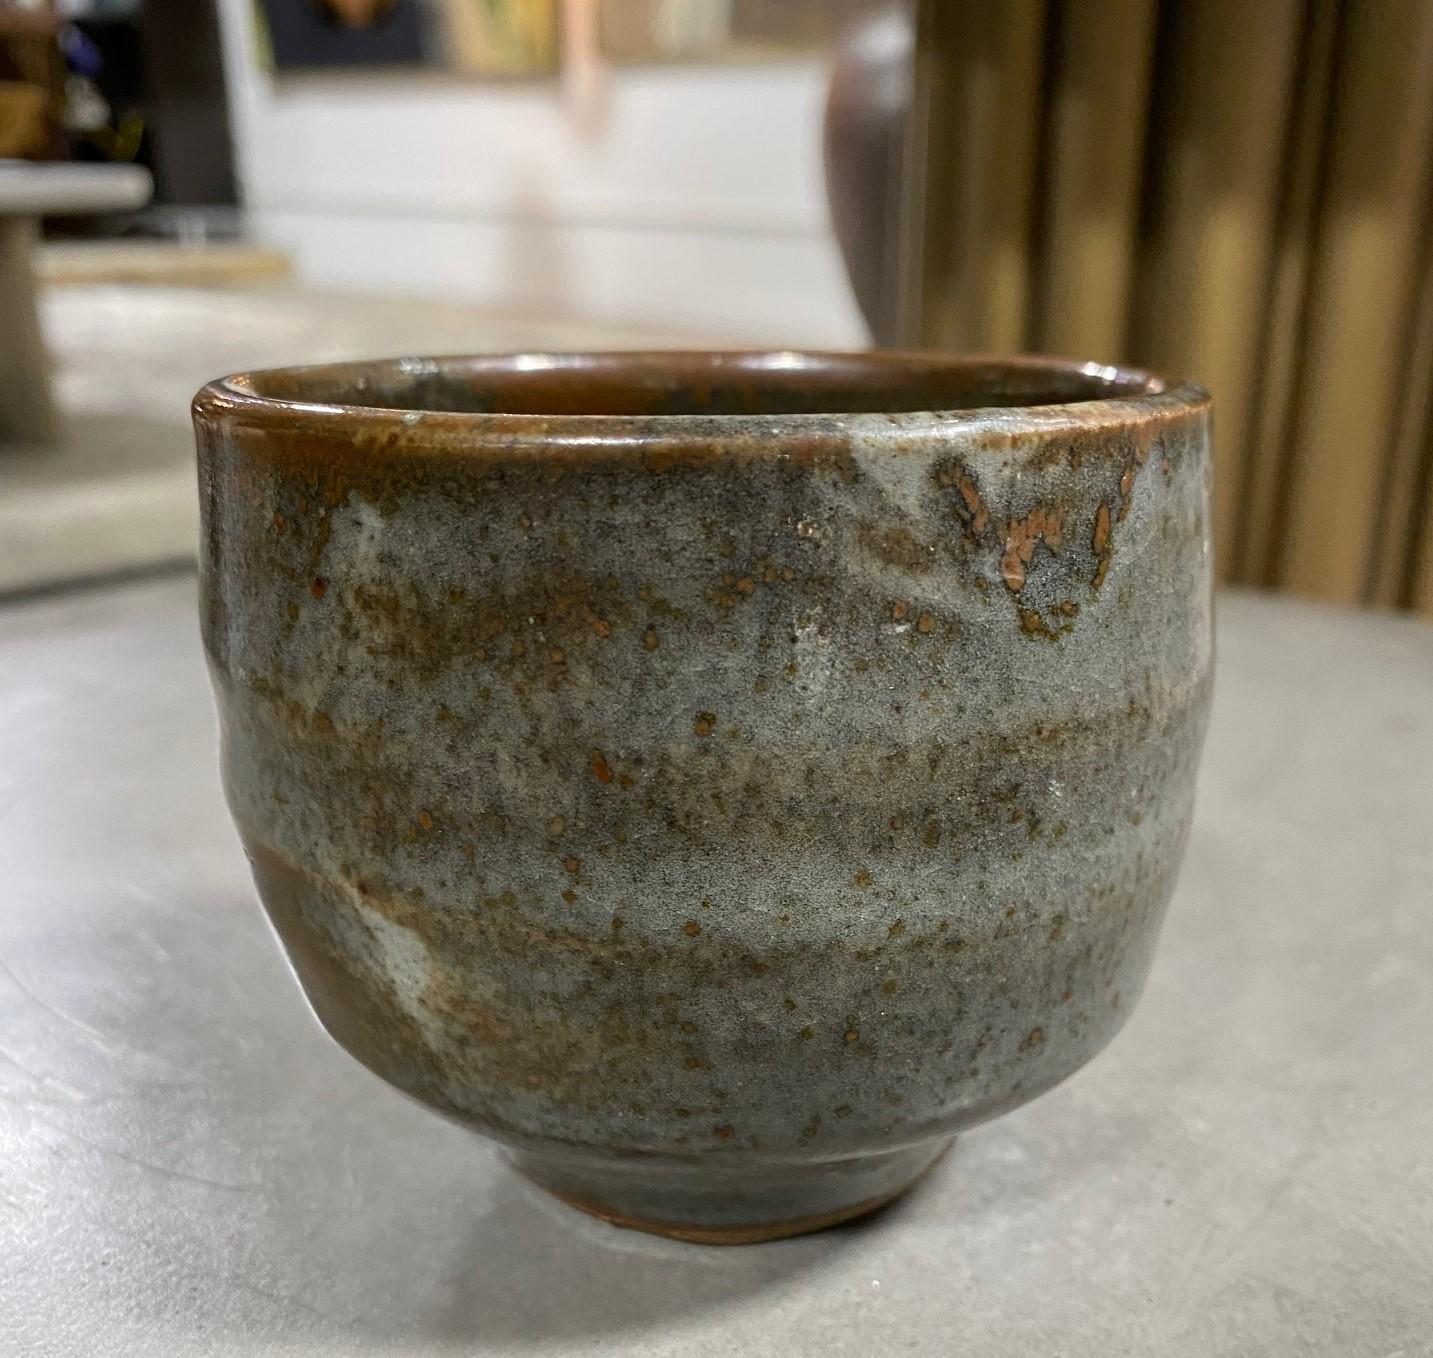 A beautiful Japanese yunomi teacup featuring a muted green glaze with a white overlay and subtle shifts in color and texture. The work glows in the light. 

This little gem came from a collector of fine Japanese and Asian ceramics - a collection